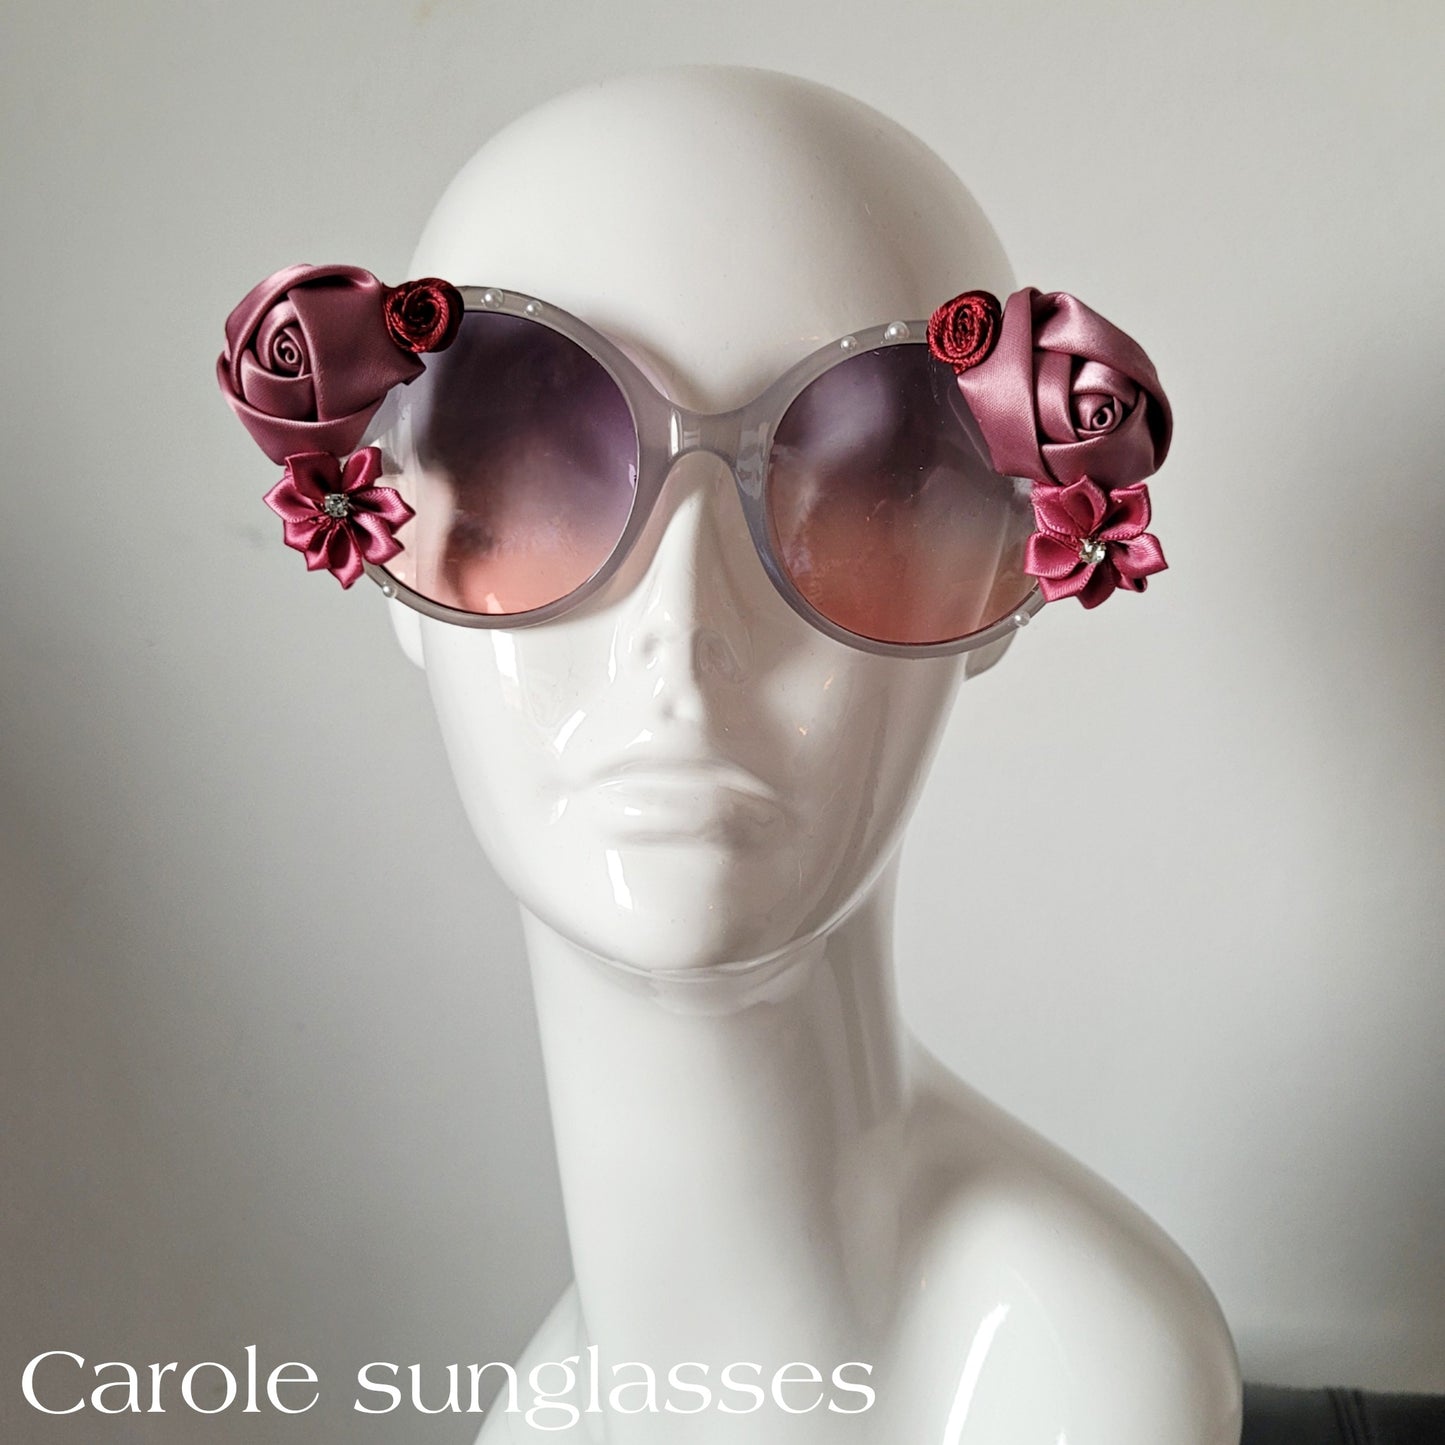 Á vallians coeurs riens impossible Collection: The Carole sunglasses